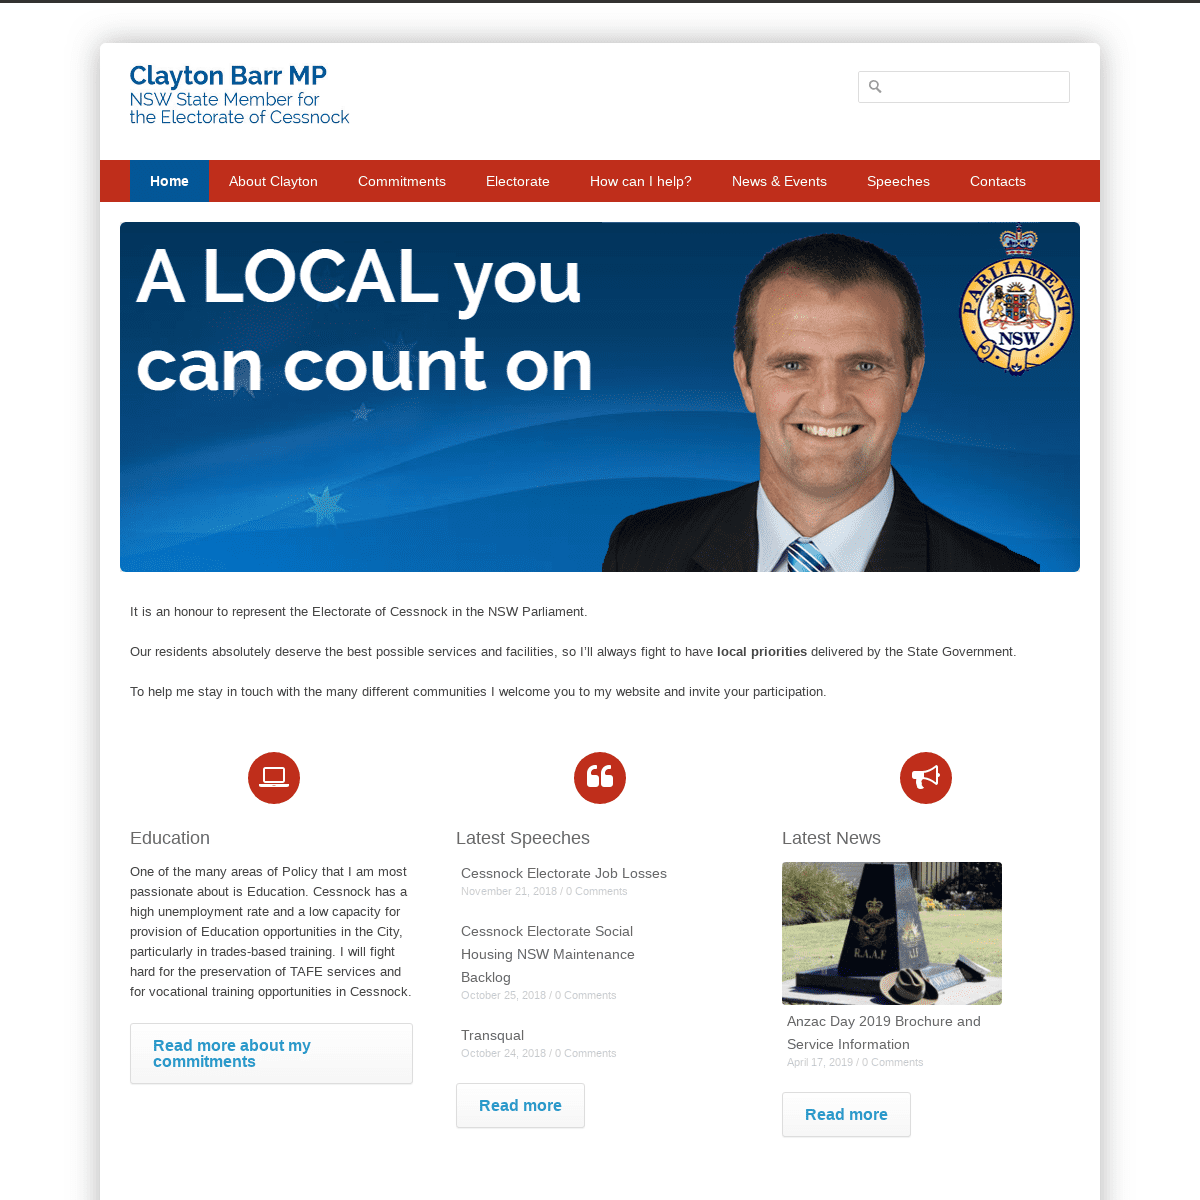 Clayton Barr MP - NSW State Member Electorate of Cessnock